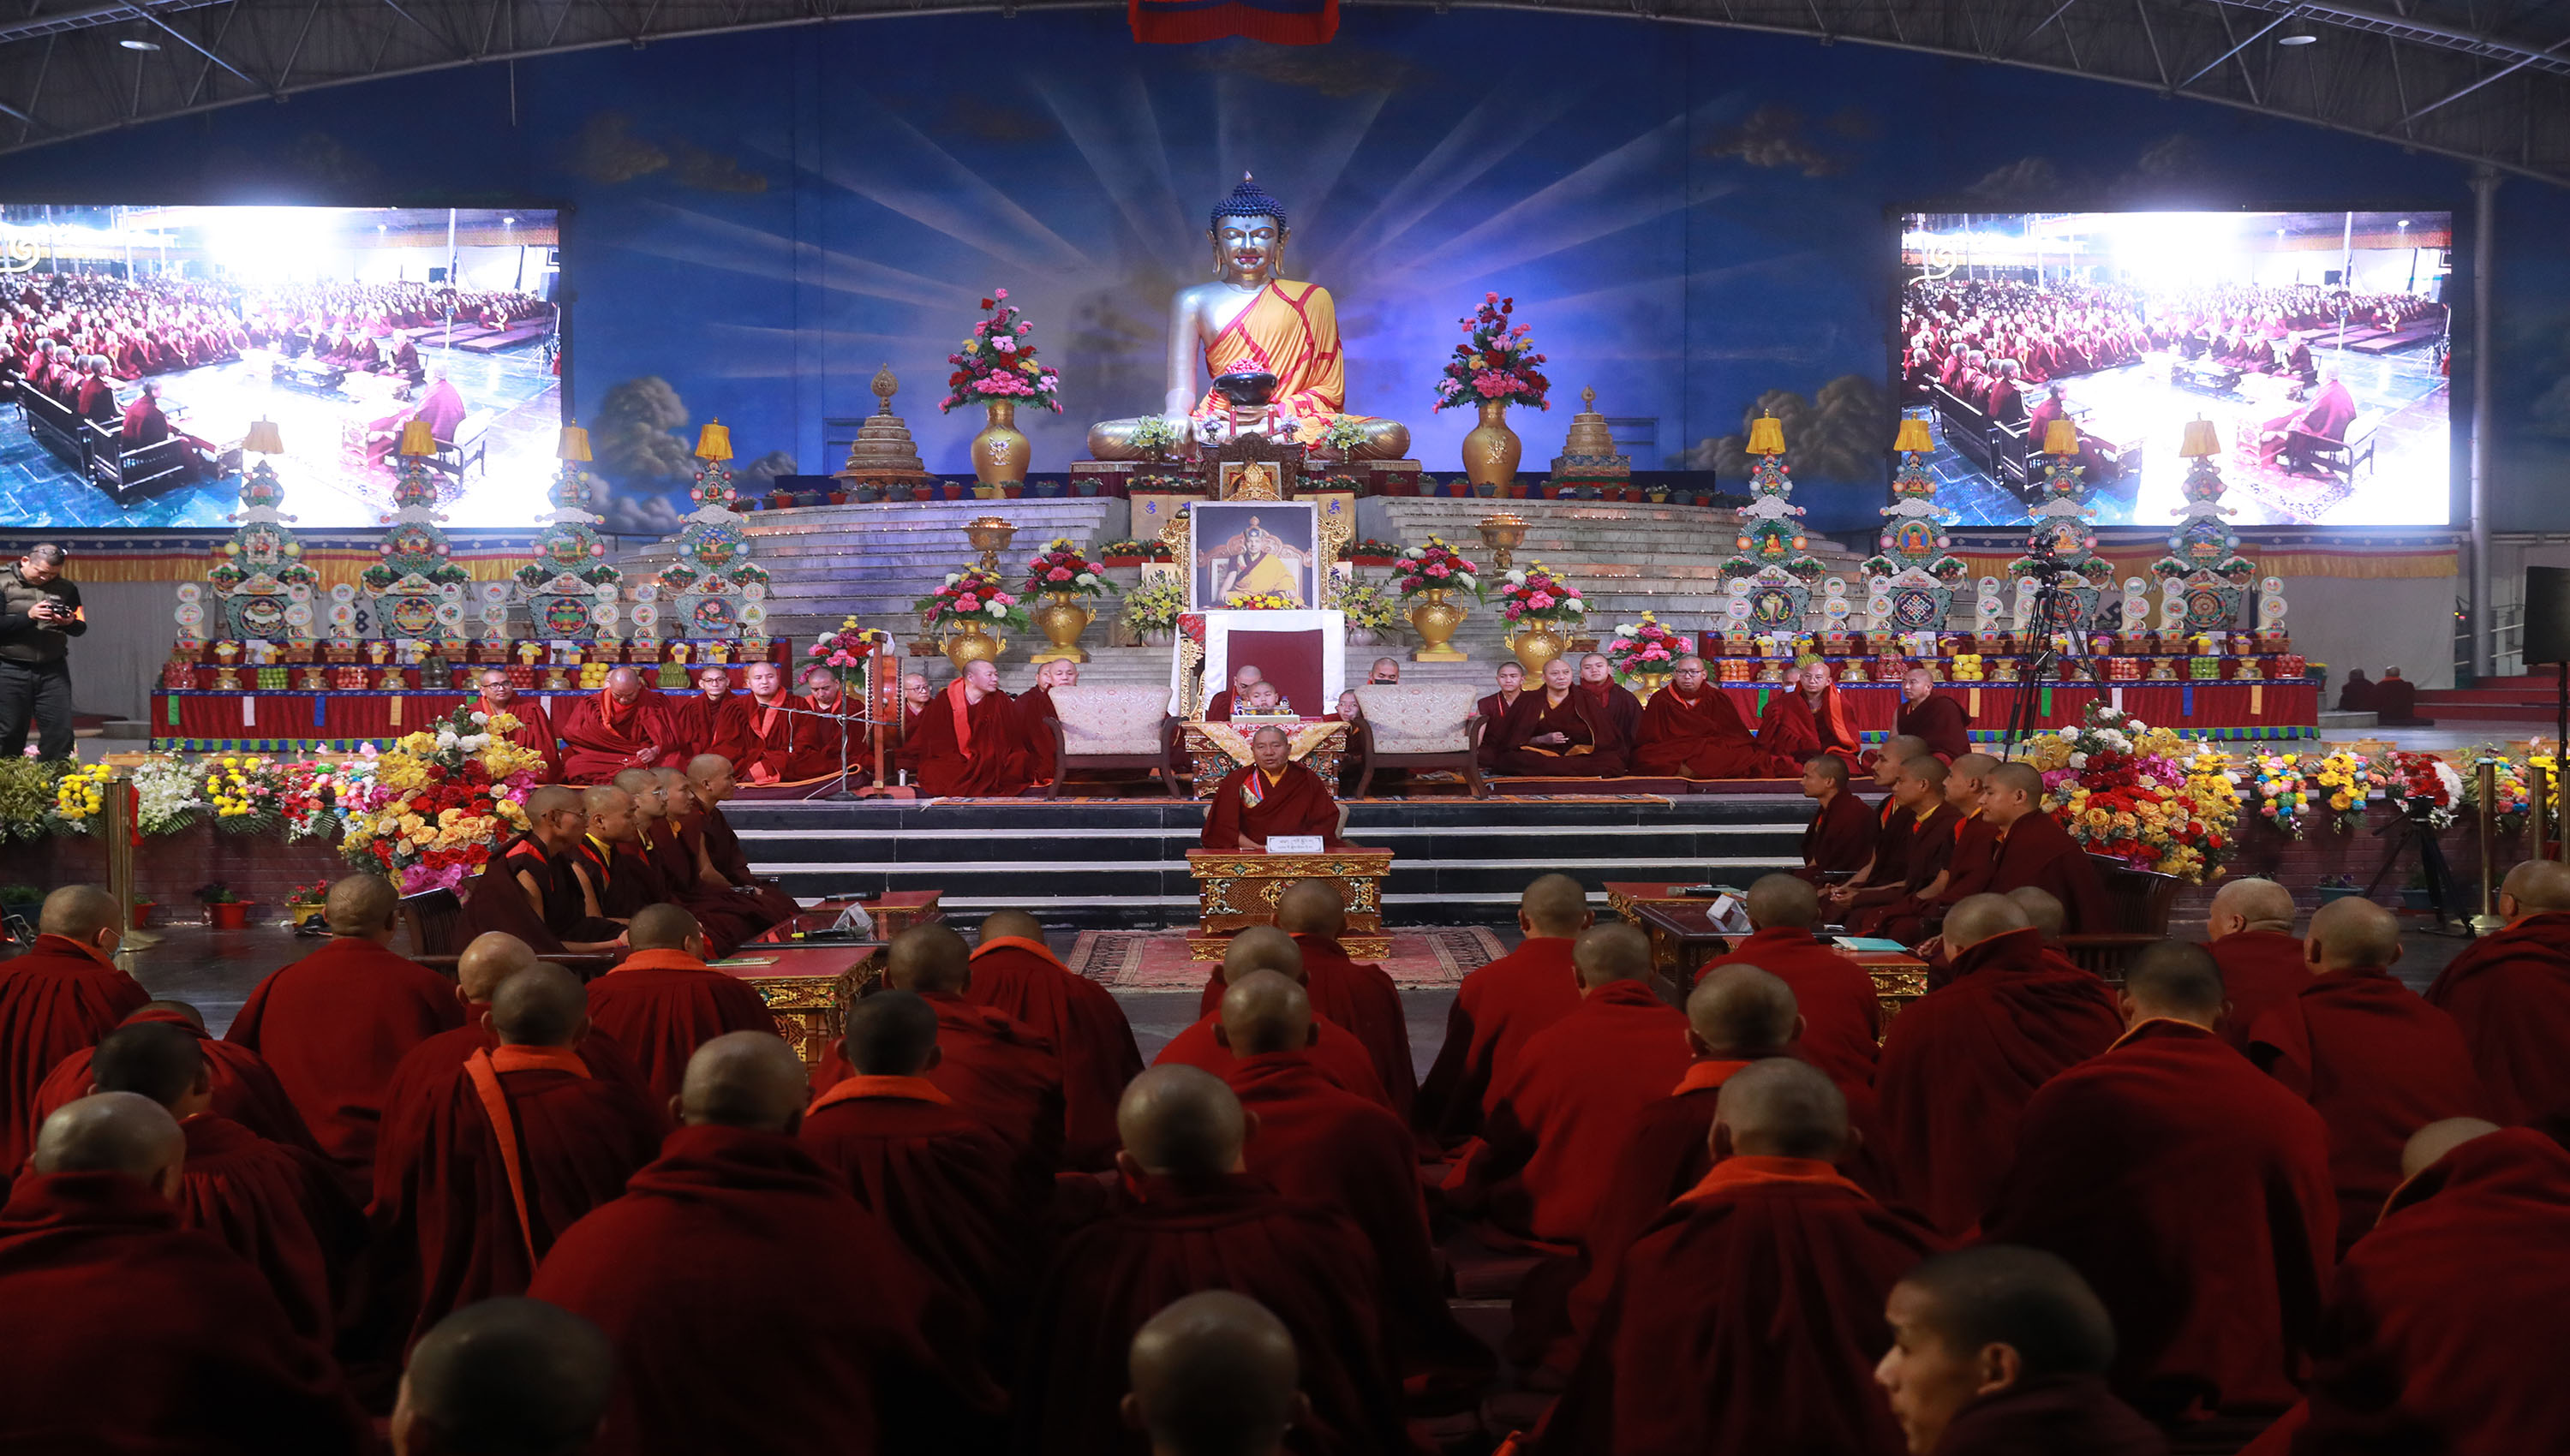 Western Style Debate on Second Day of the Kagyu Monlam